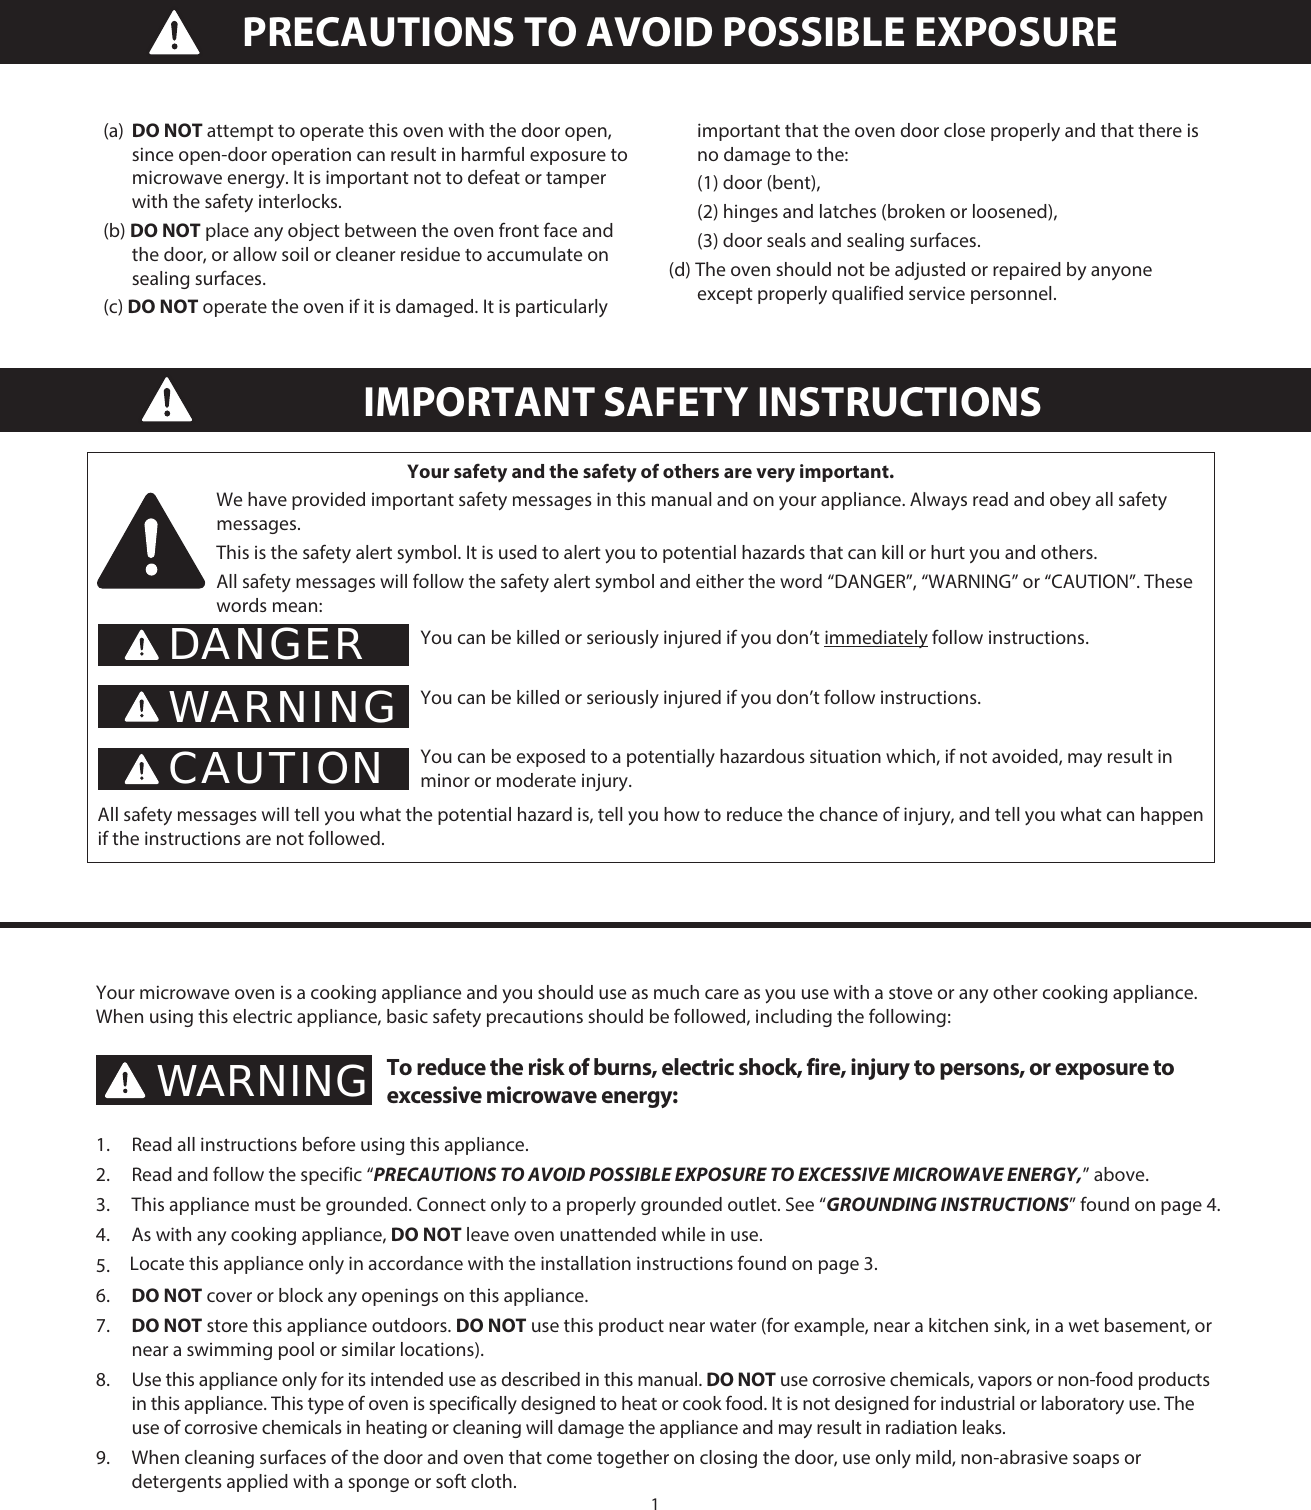 1IMPORTANT SAFETY INSTRUCTIONSYour safety and the safety of others are very important.We have provided important safety messages in this manual and on your appliance. Always read and obey all safety messages.This is the safety alert symbol. It is used to alert you to potential hazards that can kill or hurt you and others.All safety messages will follow the safety alert symbol and either the word “DANGER”, “WARNING” or “CAUTION”. These words mean:You can be killed or seriously injured if you don’t immediately follow instructions.You can be killed or seriously injured if you don’t follow instructions.You can be exposed to a potentially hazardous situation which, if not avoided, may result in minor or moderate injury.All safety messages will tell you what the potential hazard is, tell you how to reduce the chance of injury, and tell you what can happen if the instructions are not followed.DANGERWARNINGCAUTIONYour microwave oven is a cooking appliance and you should use as much care as you use with a stove or any other cooking appliance. When using this electric appliance, basic safety precautions should be followed, including the following:To reduce the risk of burns, electric shock, fire, injury to persons, or exposure to excessive microwave energy:1.  Read all instructions before using this appliance.2.  Read and follow the specific “PRECAUTIONS TO AVOID POSSIBLE EXPOSURE TO EXCESSIVE MICROWAVE ENERGY,” above.3.  This appliance must be grounded. Connect only to a properly grounded outlet. See “GROUNDING INSTRUCTIONS” found on page  .4.  As with any cooking appliance, DO NOT leave oven unattended while in use. 5. 6.  DO NOT cover or block any openings on this appliance.7.  DO NOT store this appliance outdoors. DO NOT use this product near water (for example, near a kitchen sink, in a wet basement, or near a swimming pool or similar locations).8.  Use this appliance only for its intended use as described in this manual. DO NOT use corrosive chemicals, vapors or non-food products in this appliance. This type of oven is specifically designed to heat or cook food. It is not designed for industrial or laboratory use. The use of corrosive chemicals in heating or cleaning will damage the appliance and may result in radiation leaks.9.  When cleaning surfaces of the door and oven that come together on closing the door, use only mild, non-abrasive soaps or detergents applied with a sponge or soft cloth.WARNINGLocate this appliance only in accordance with the installation instructions found on page 3.4(a)  DO NOT attempt to operate this oven with the door open, since open-door operation can result in harmful exposure to microwave energy. It is important not to defeat or tamper with the safety interlocks.(b) DO NOT place any object between the oven front face and the door, or allow soil or cleaner residue to accumulate on sealing surfaces.(c) DO NOT operate the oven if it is damaged. It is particularly important that the oven door close properly and that there is no damage to the:  (1) door (bent),  (2) hinges and latches (broken or loosened),  (3) door seals and sealing surfaces.(d) The oven should not be adjusted or repaired by anyone except properly qualified service personnel.PRECAUTIONS TO AVOID POSSIBLE EXPOSURE